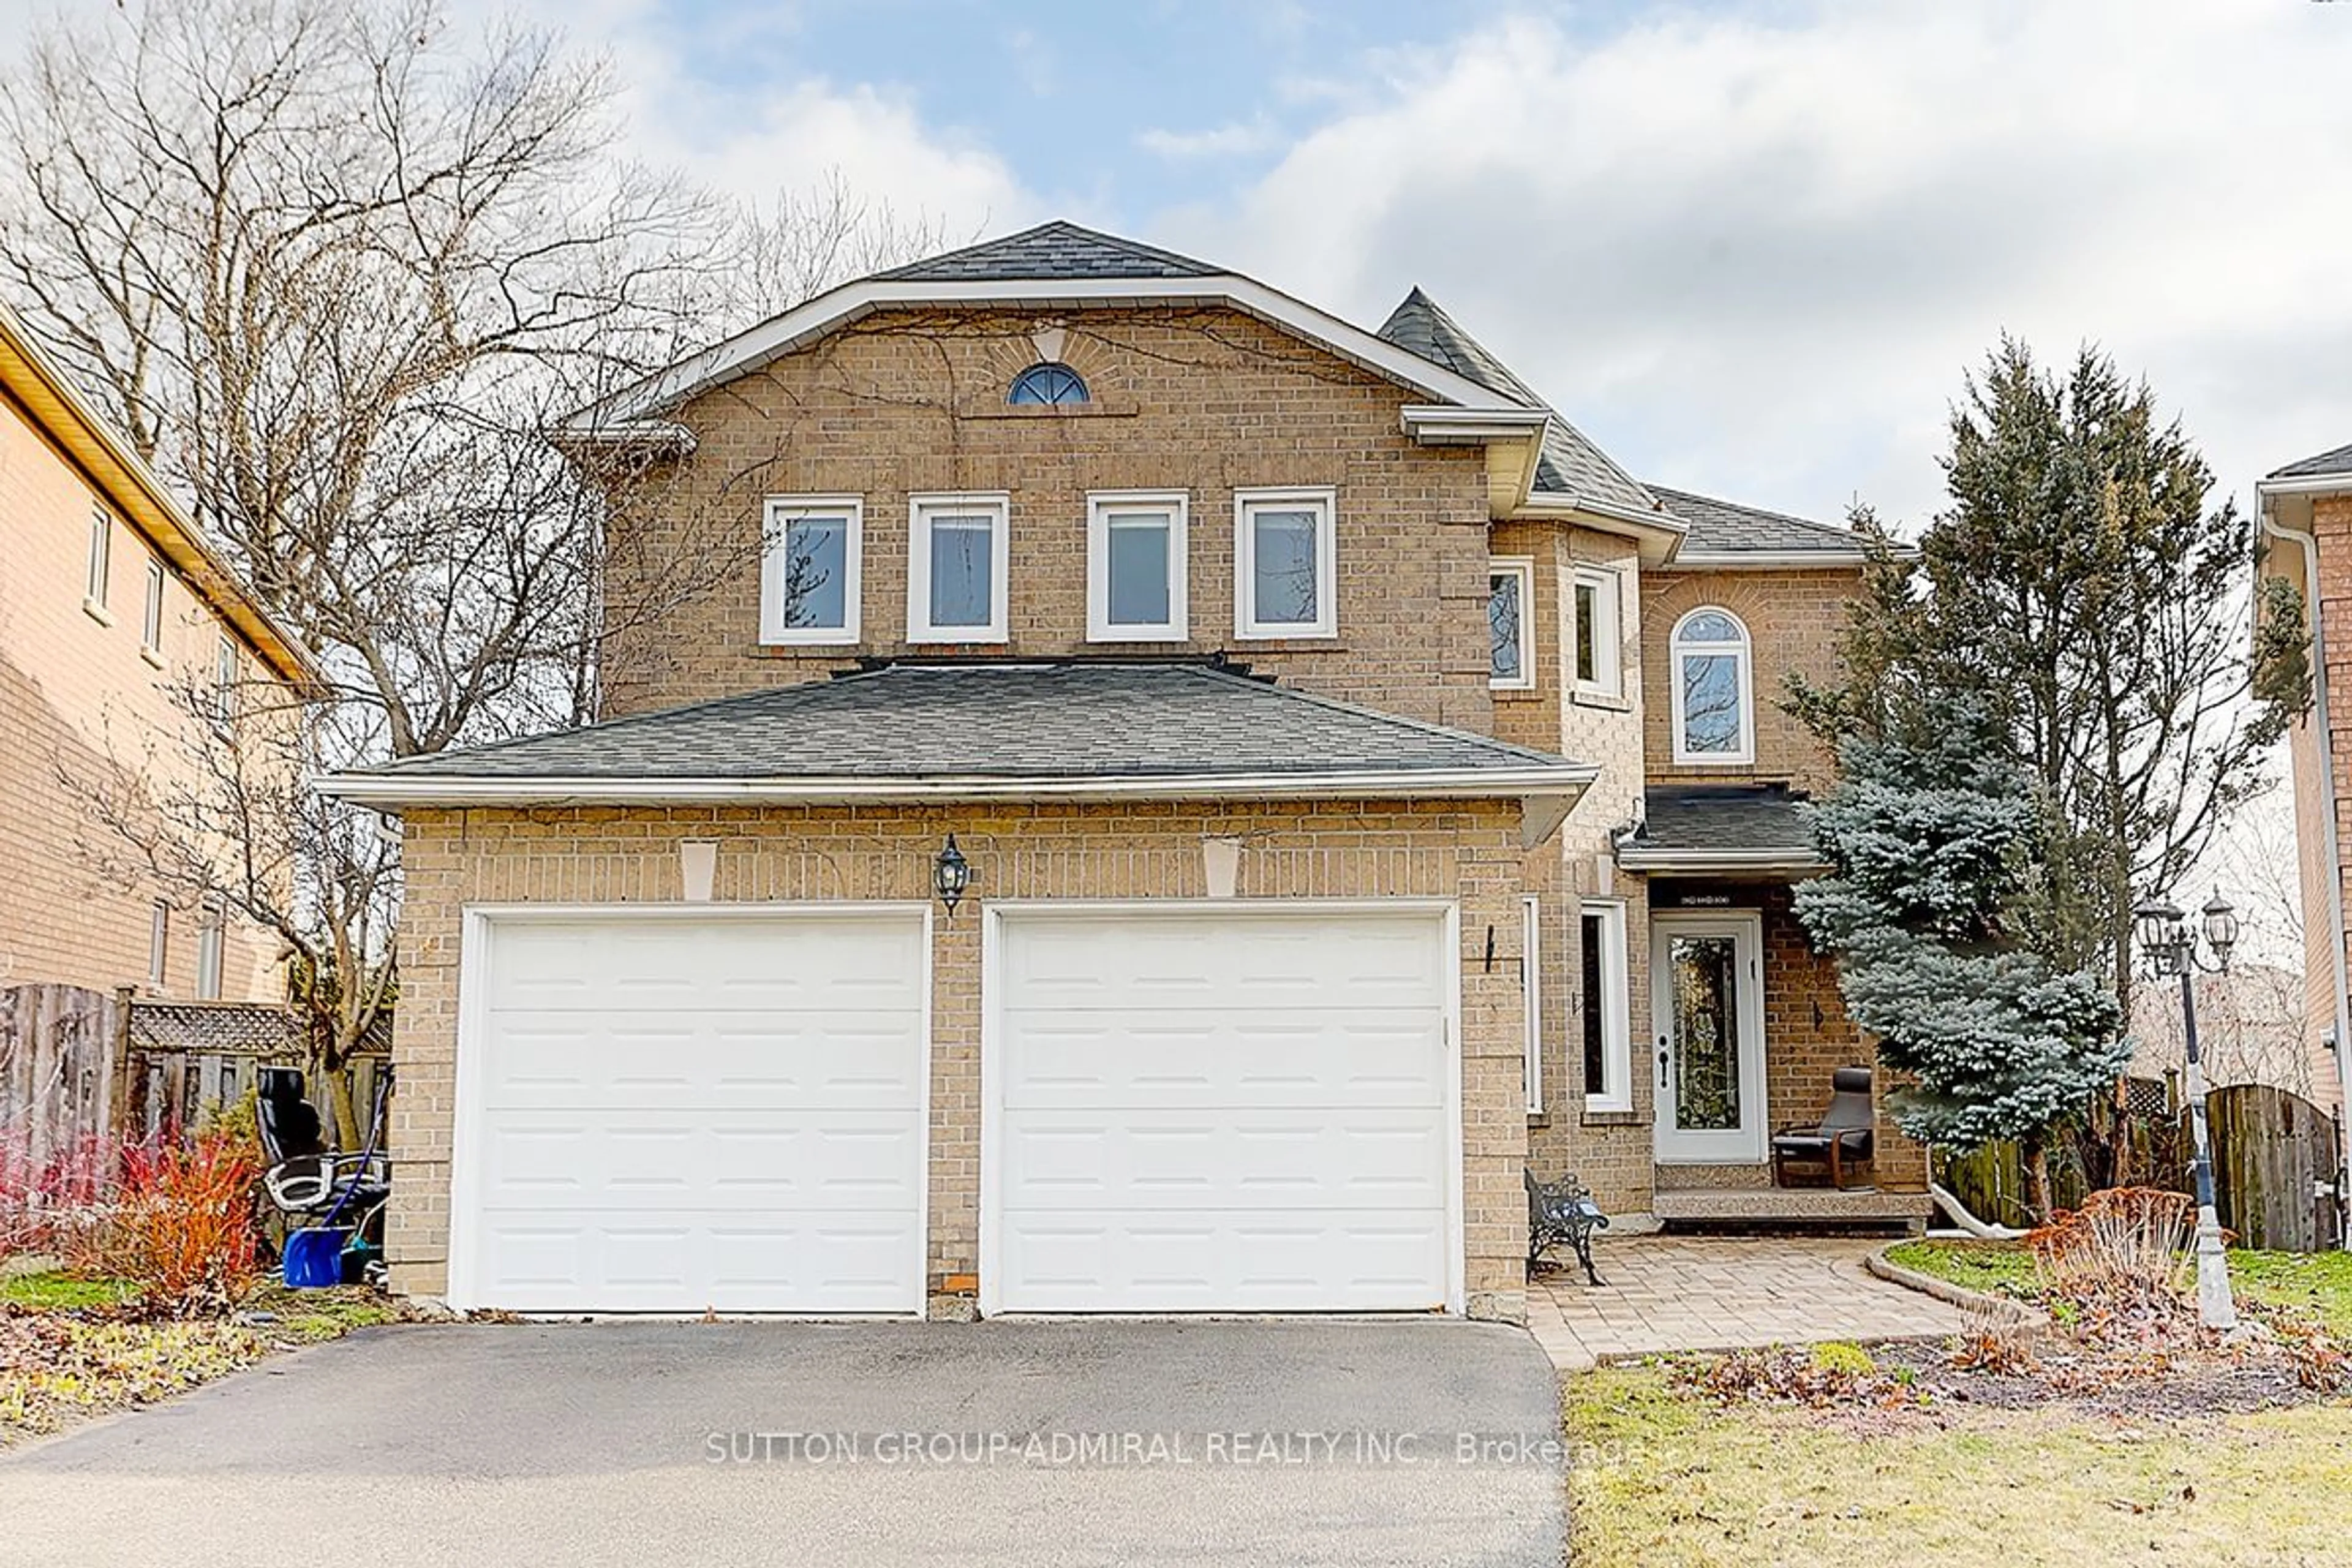 Home with stone exterior material for 40 Red Rock Dr, Richmond Hill Ontario L4C 0E4